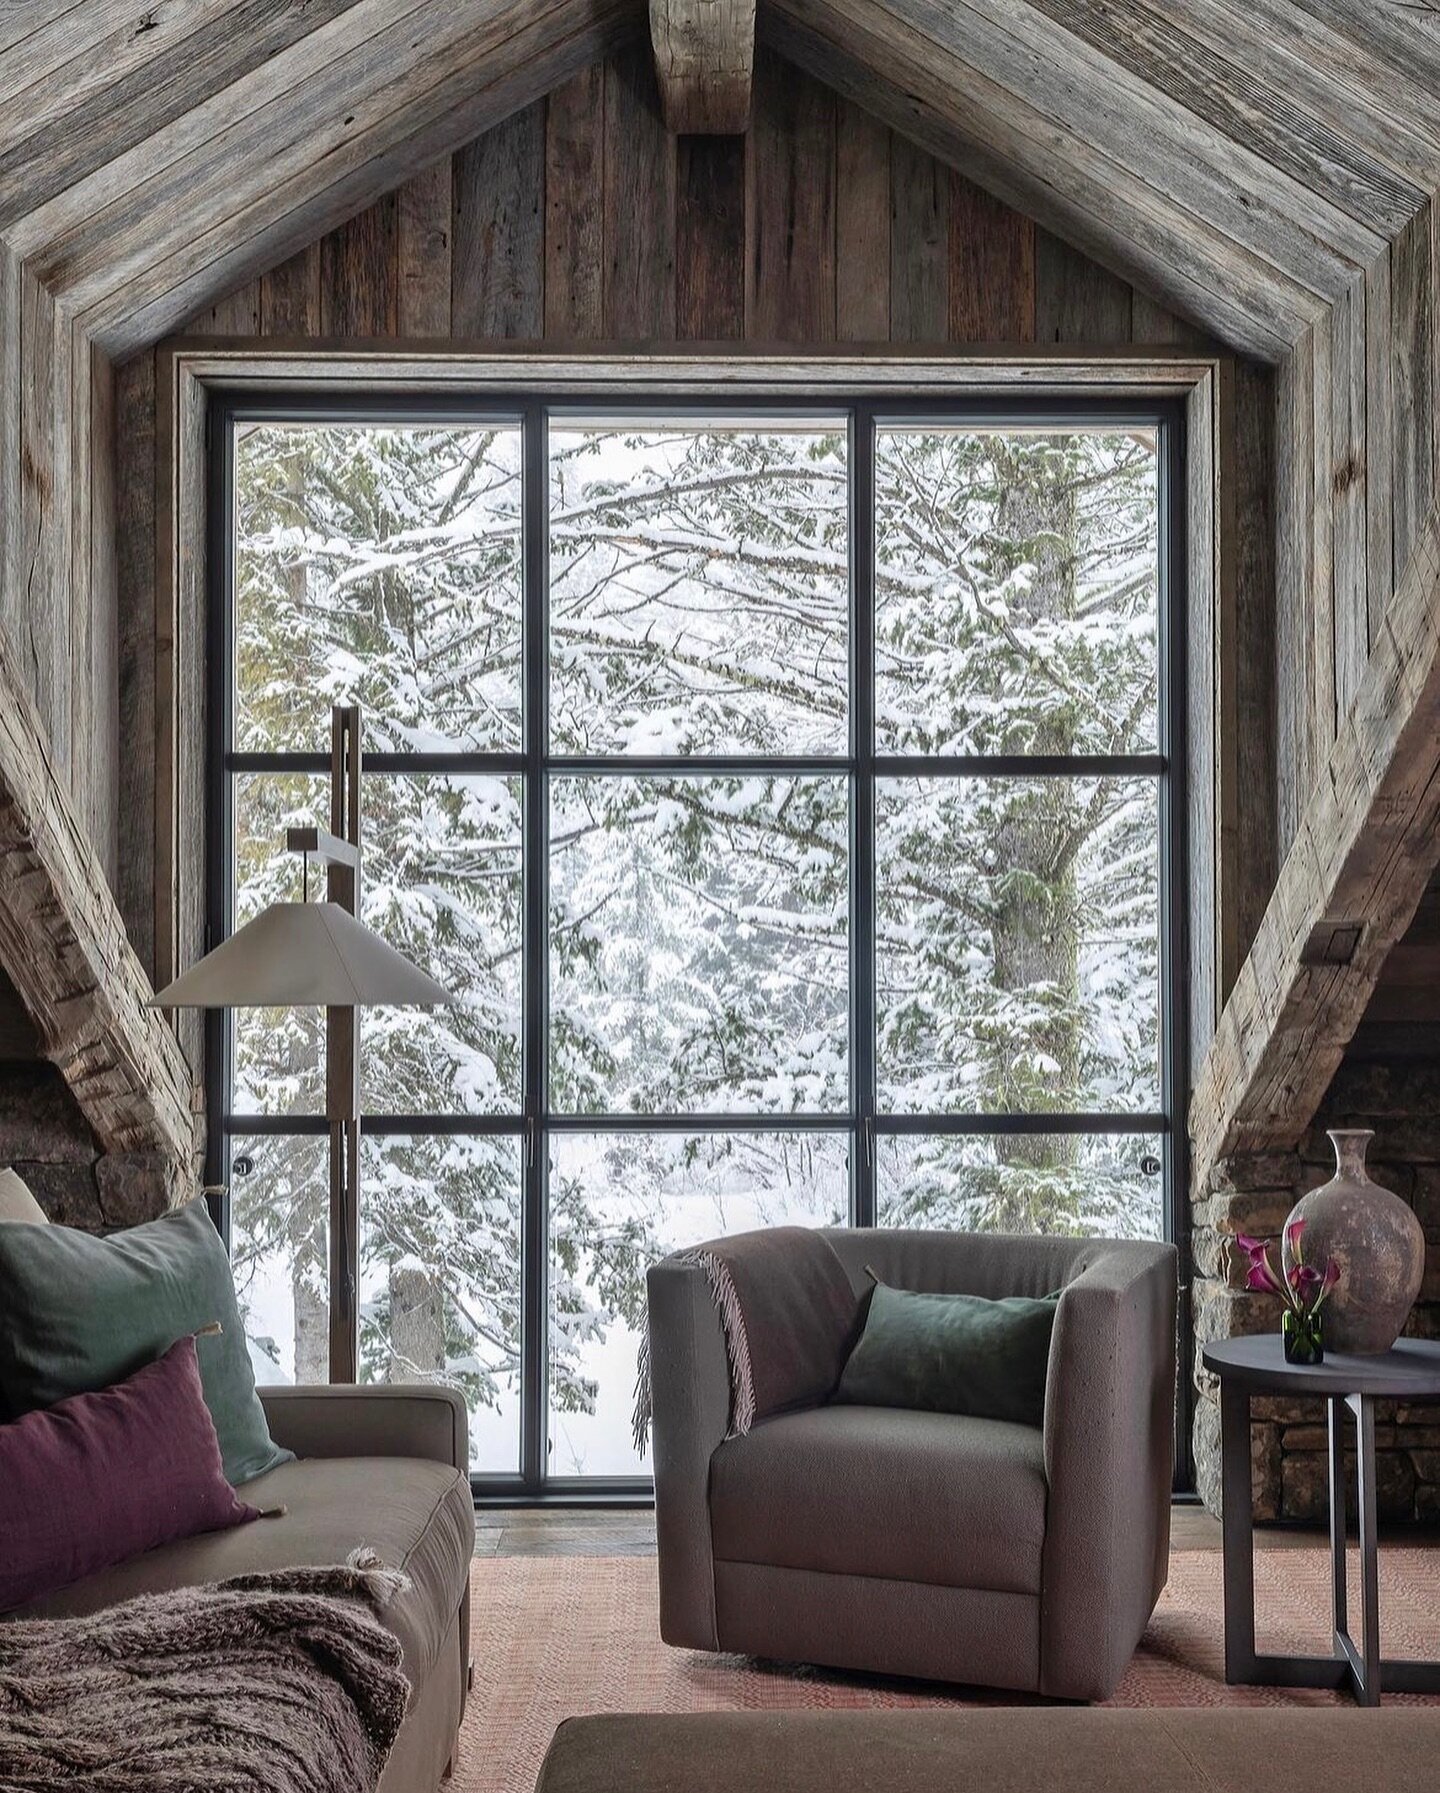 Last gasp of winter in snow country. A charming bedroom by @jlfarchitects with @bigdsignature.
&bull;
Photograph by @audreyhallphoto
&bull;
&bull;
&bull;
#snowcountry #cabinstyle #cabininthewoods #bedroom #rusticbedroom #bedroomgoals #cabinstyle #bed